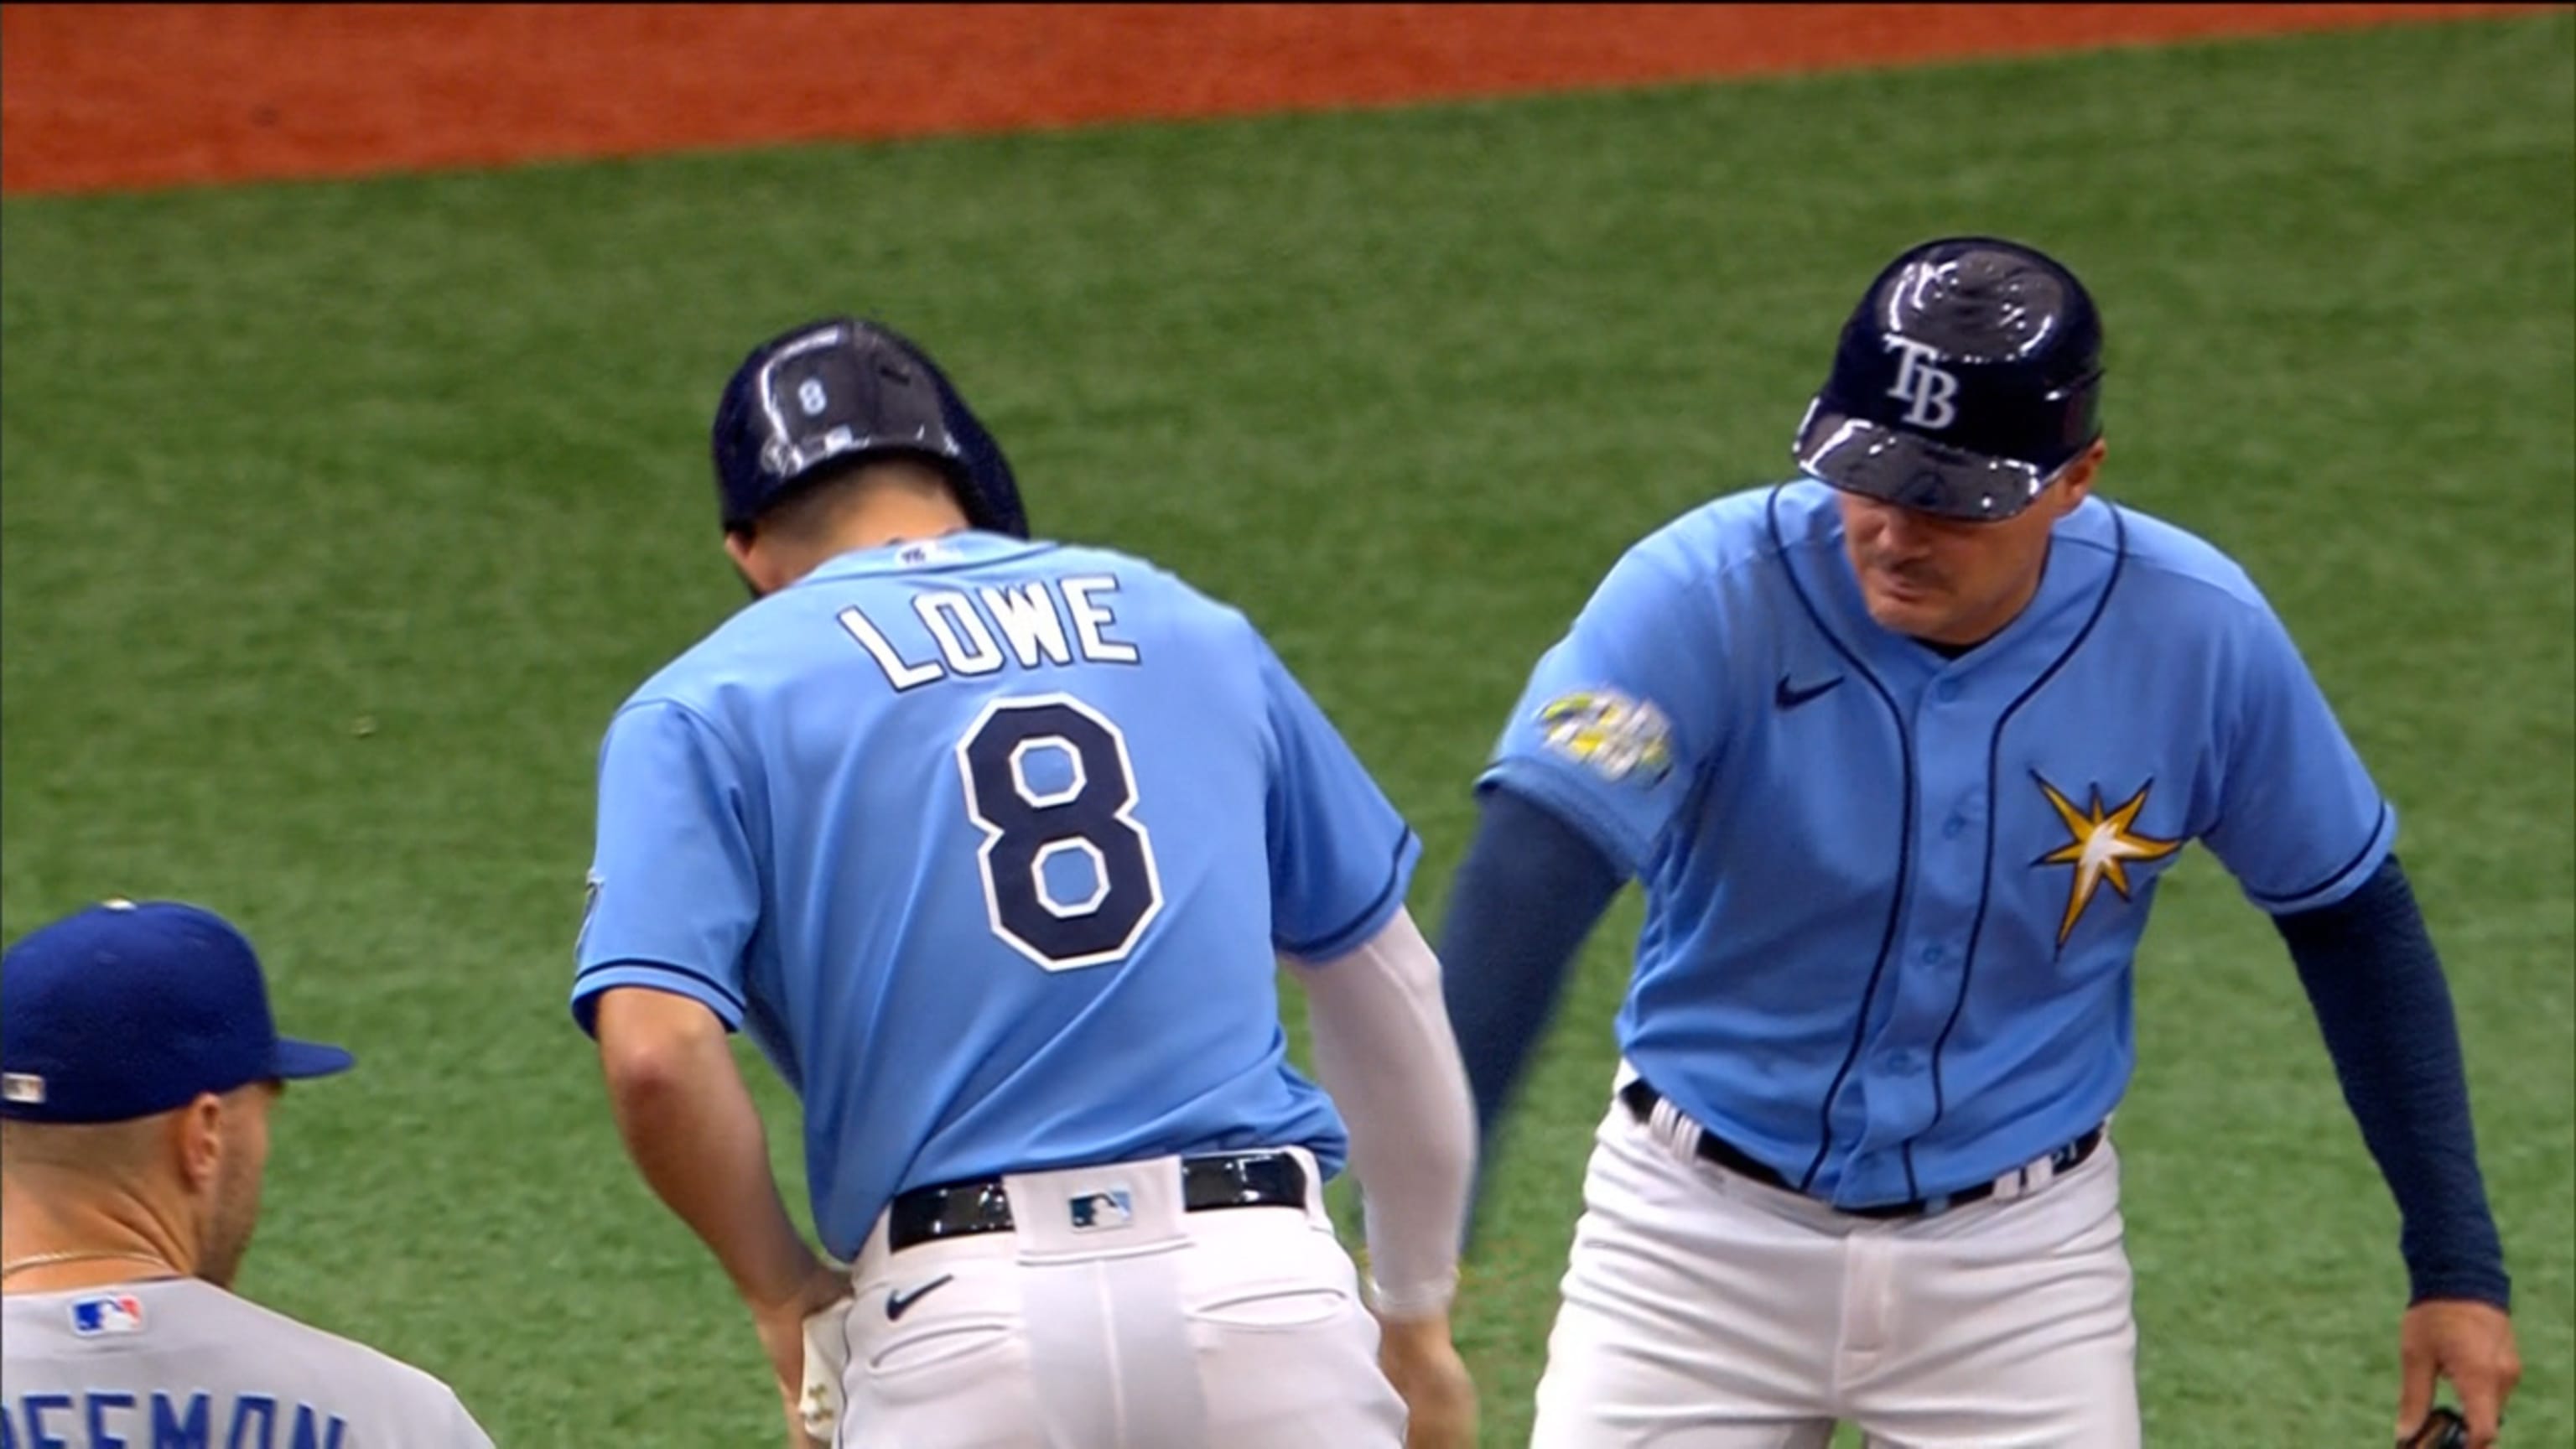 Brothers Josh Lowe, Nathaniel Lowe face off for first time in Majors